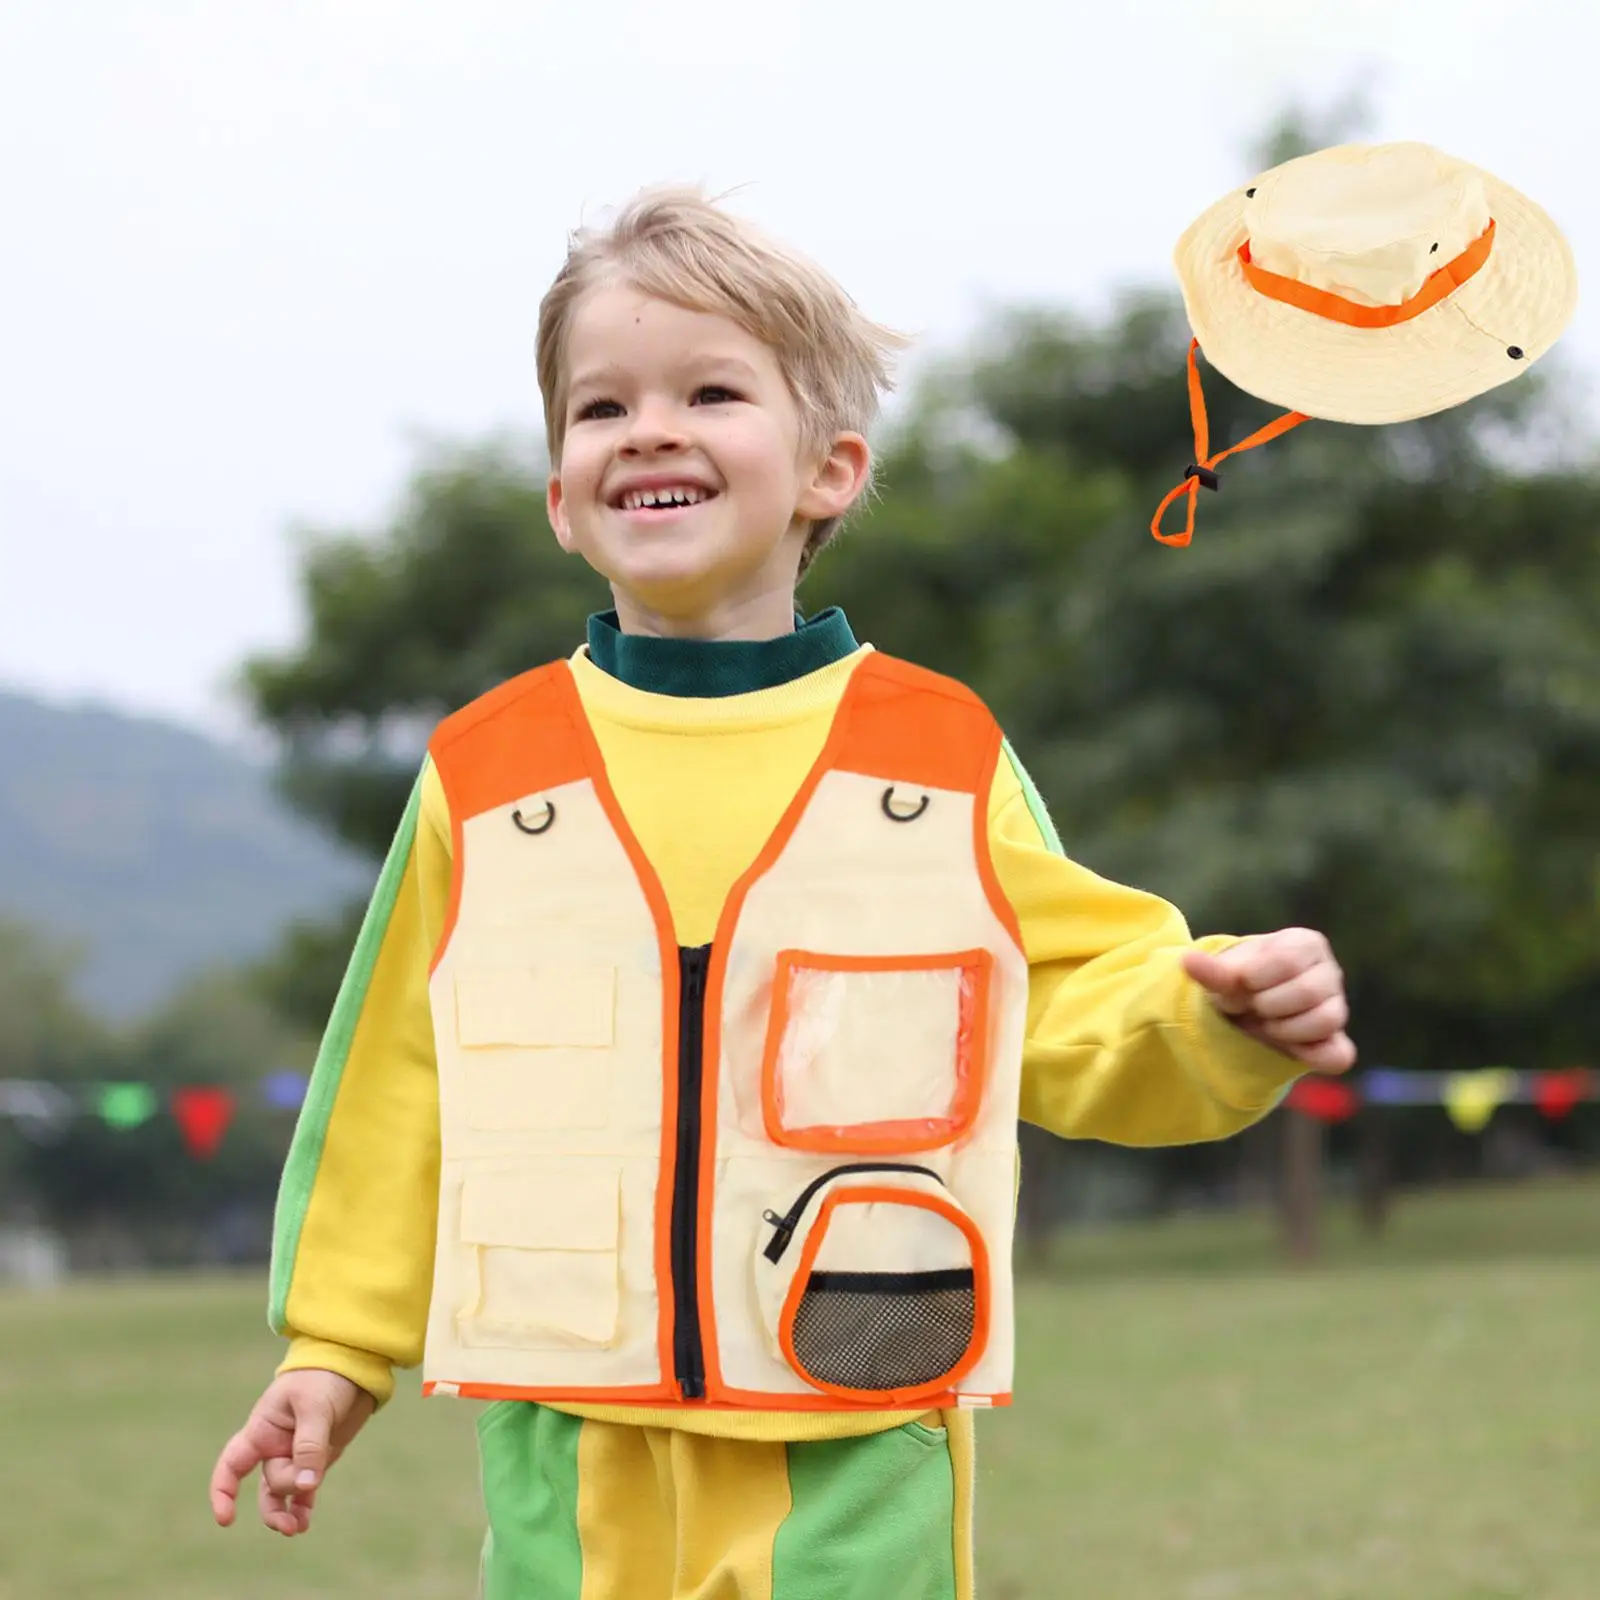 Kids Explorer Costume Kit Vest and Hat Set Role Play Costumes for Children